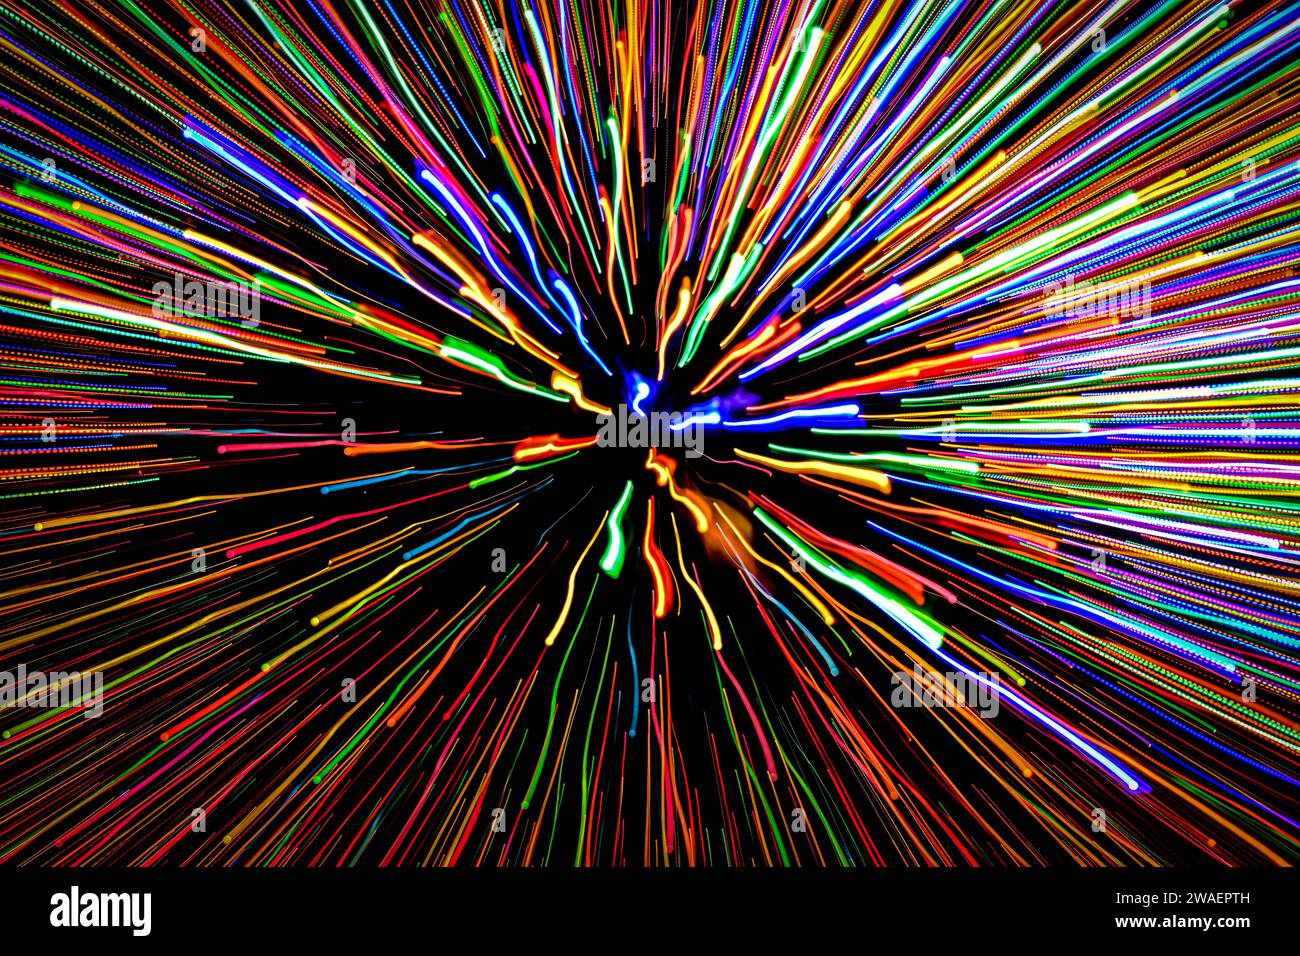 The Christmas lights zoomed in during exposure to give a hyperspace look Stock Photo